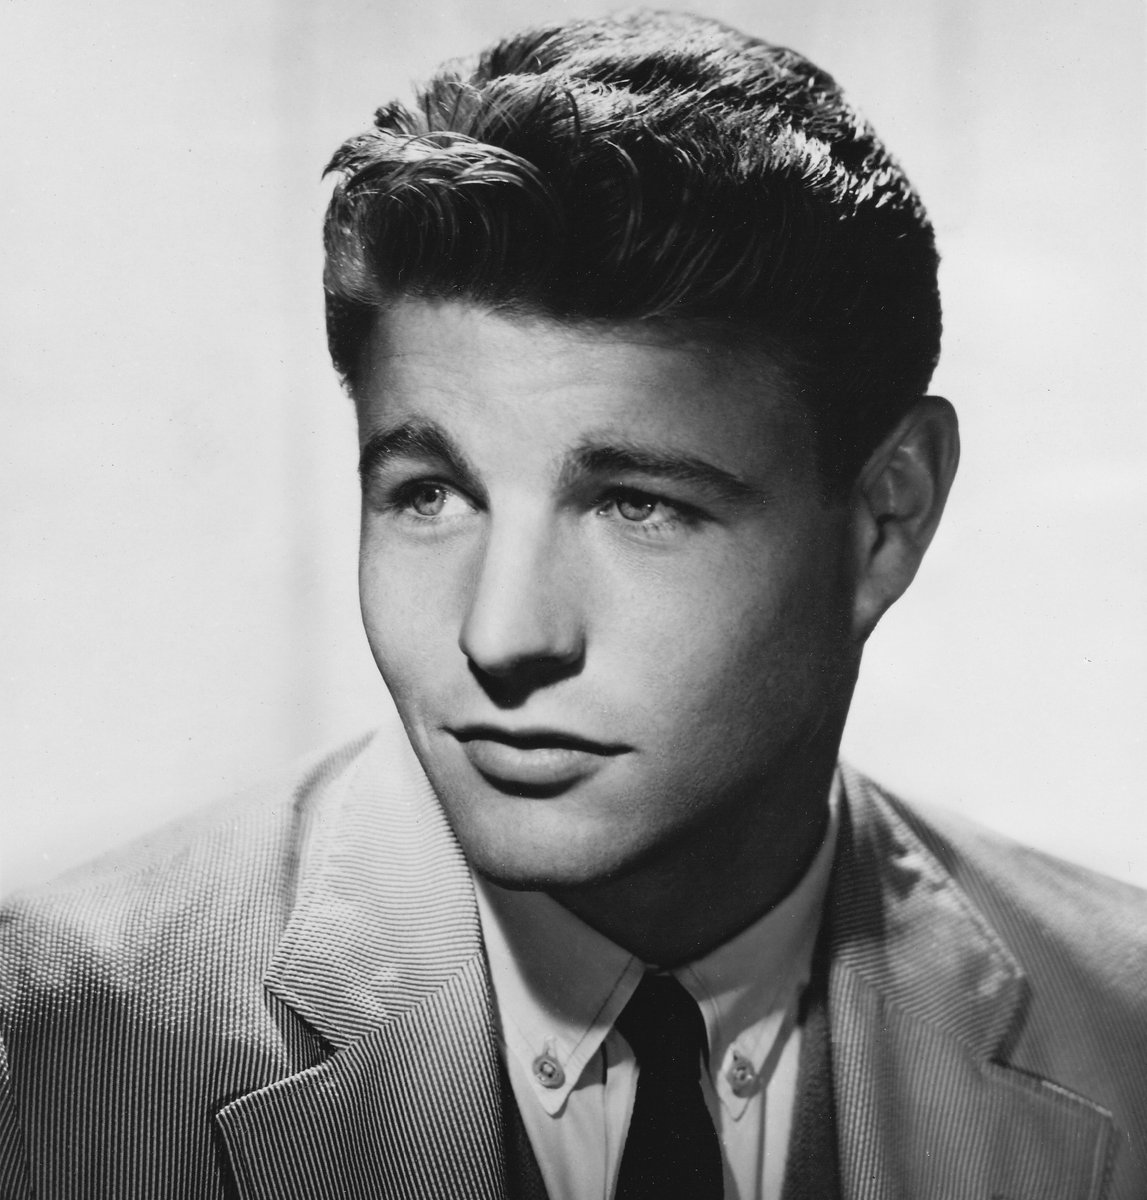 Born Today, Oct 24, in 1936, David Nelson - Here Come the Nelsons, Peyton Place - & of course The Adventures of Ozzie & Harriet!